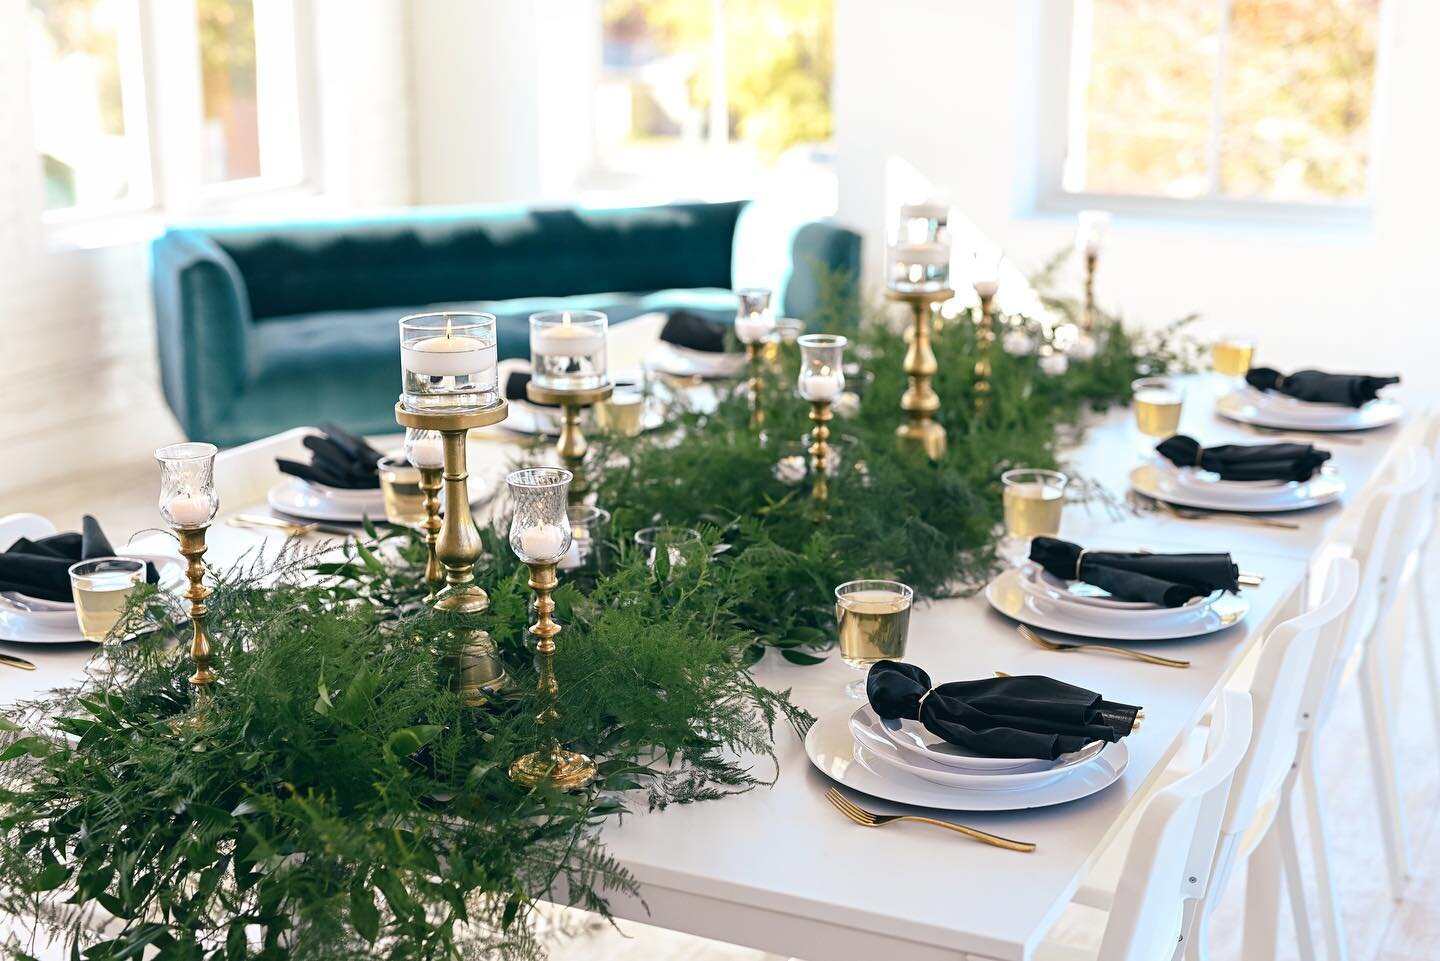 Table Service partnered up with @orchardlaneflowers + @maggieberri for this festive holiday table ✨✨